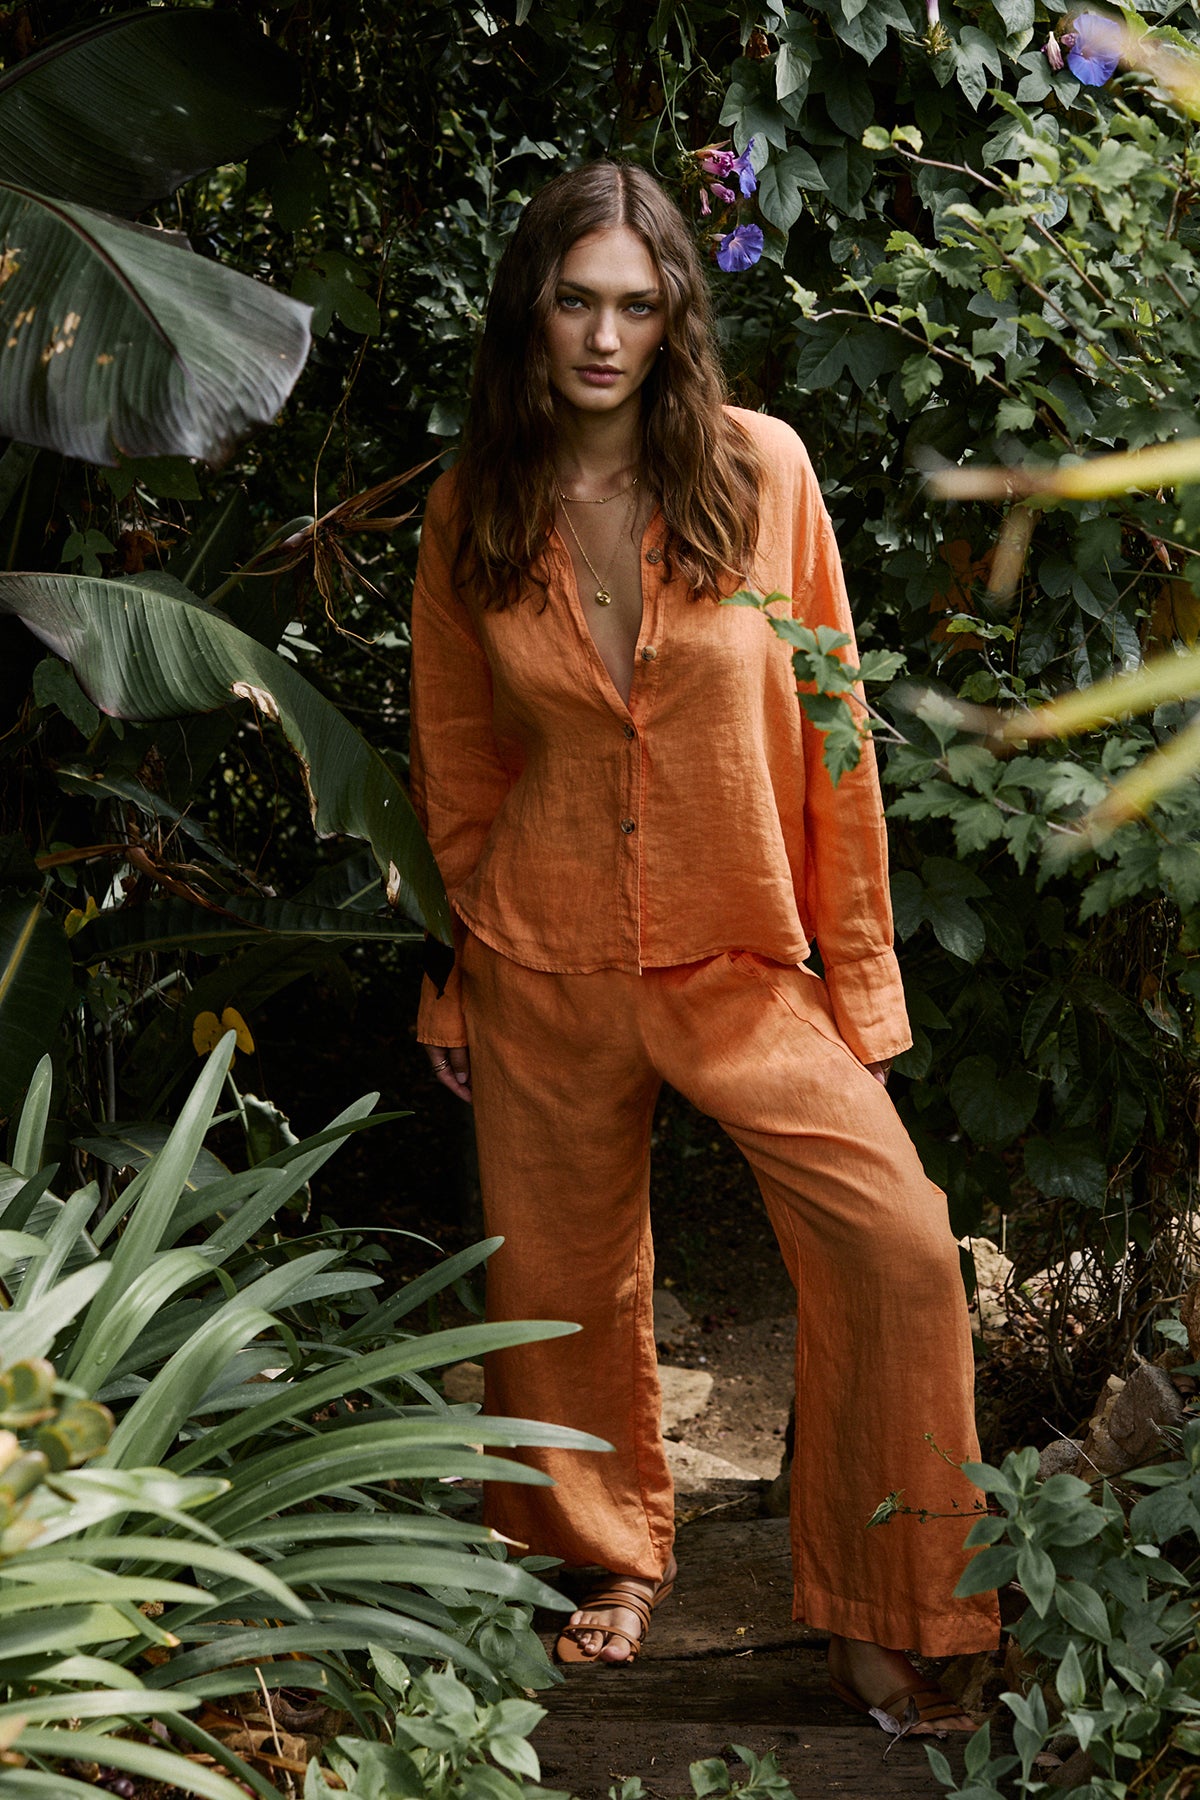   Women standing outdoors surrounded by trees wearing Eden shirt in orange heat with Lola pant, necklaces and sandals full length front 